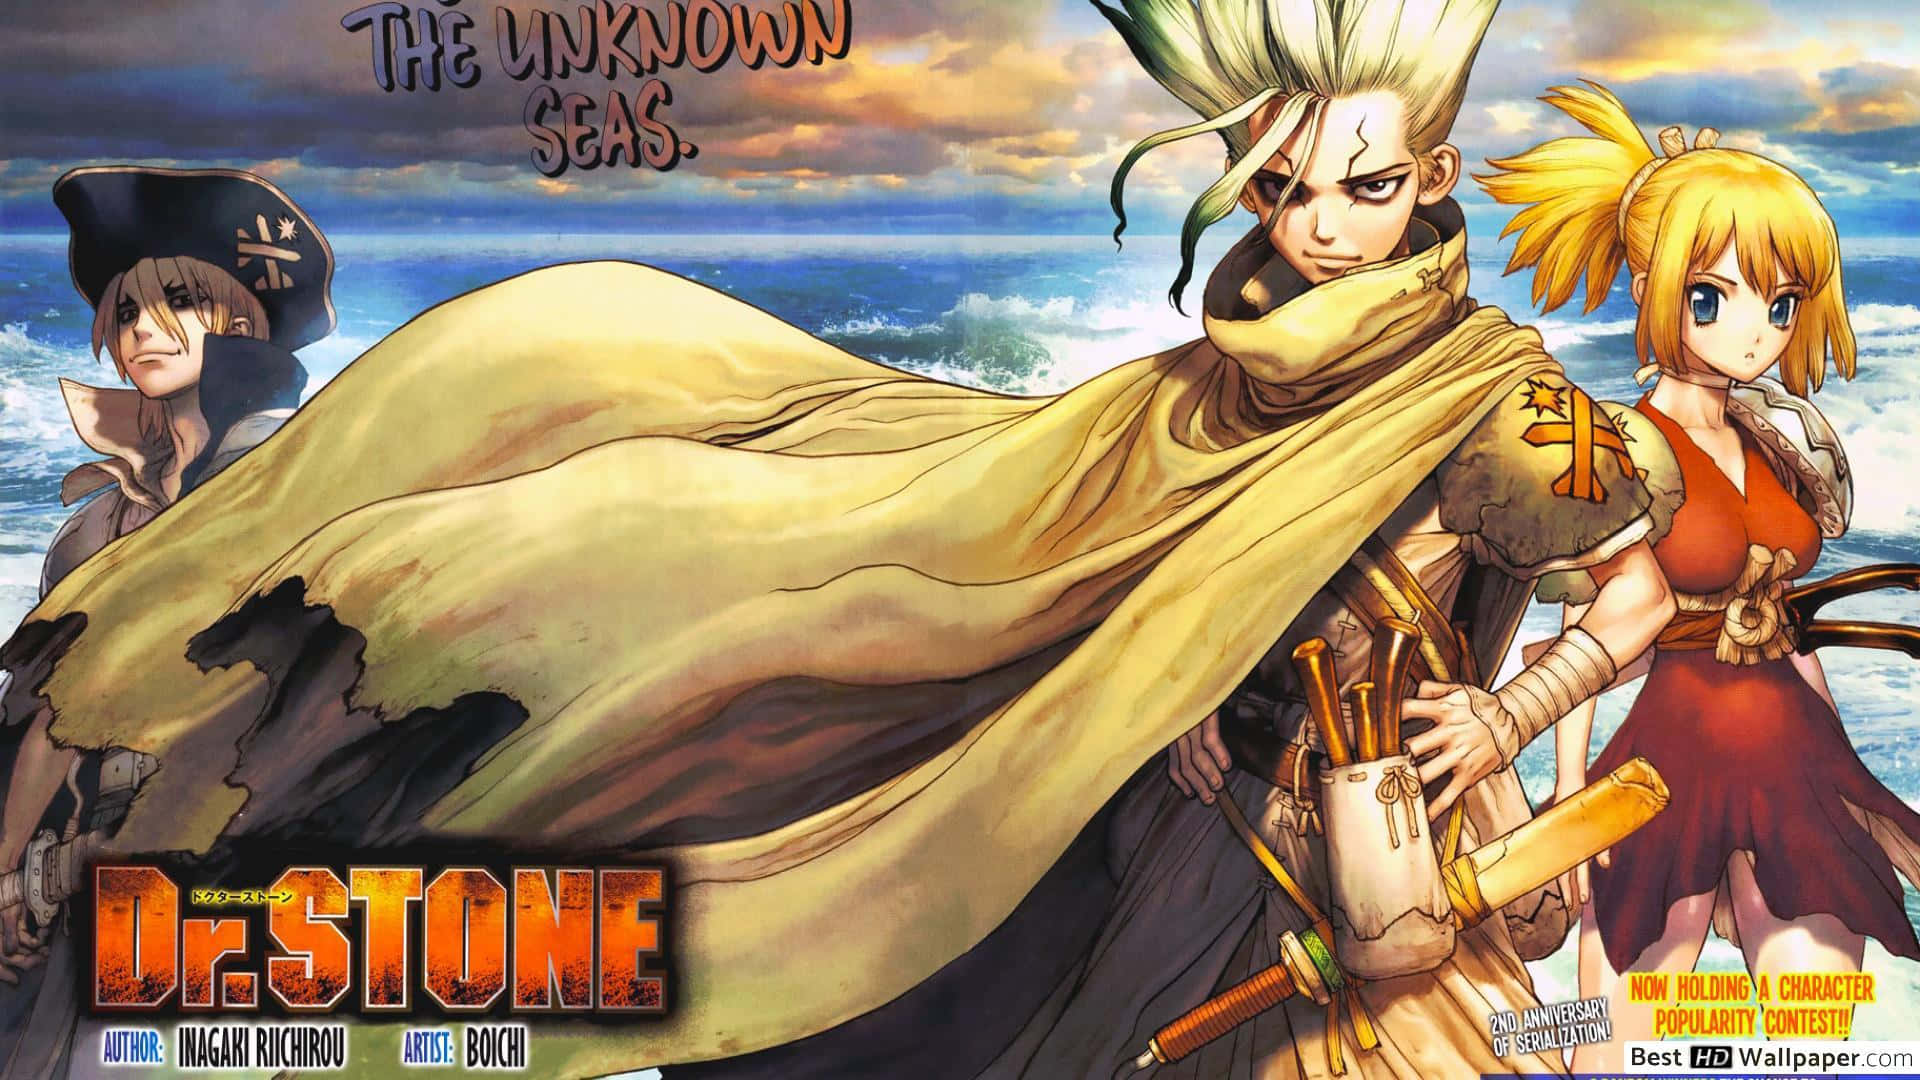 Find the Way to Rebuild and Rediscover the World with Dr Stone